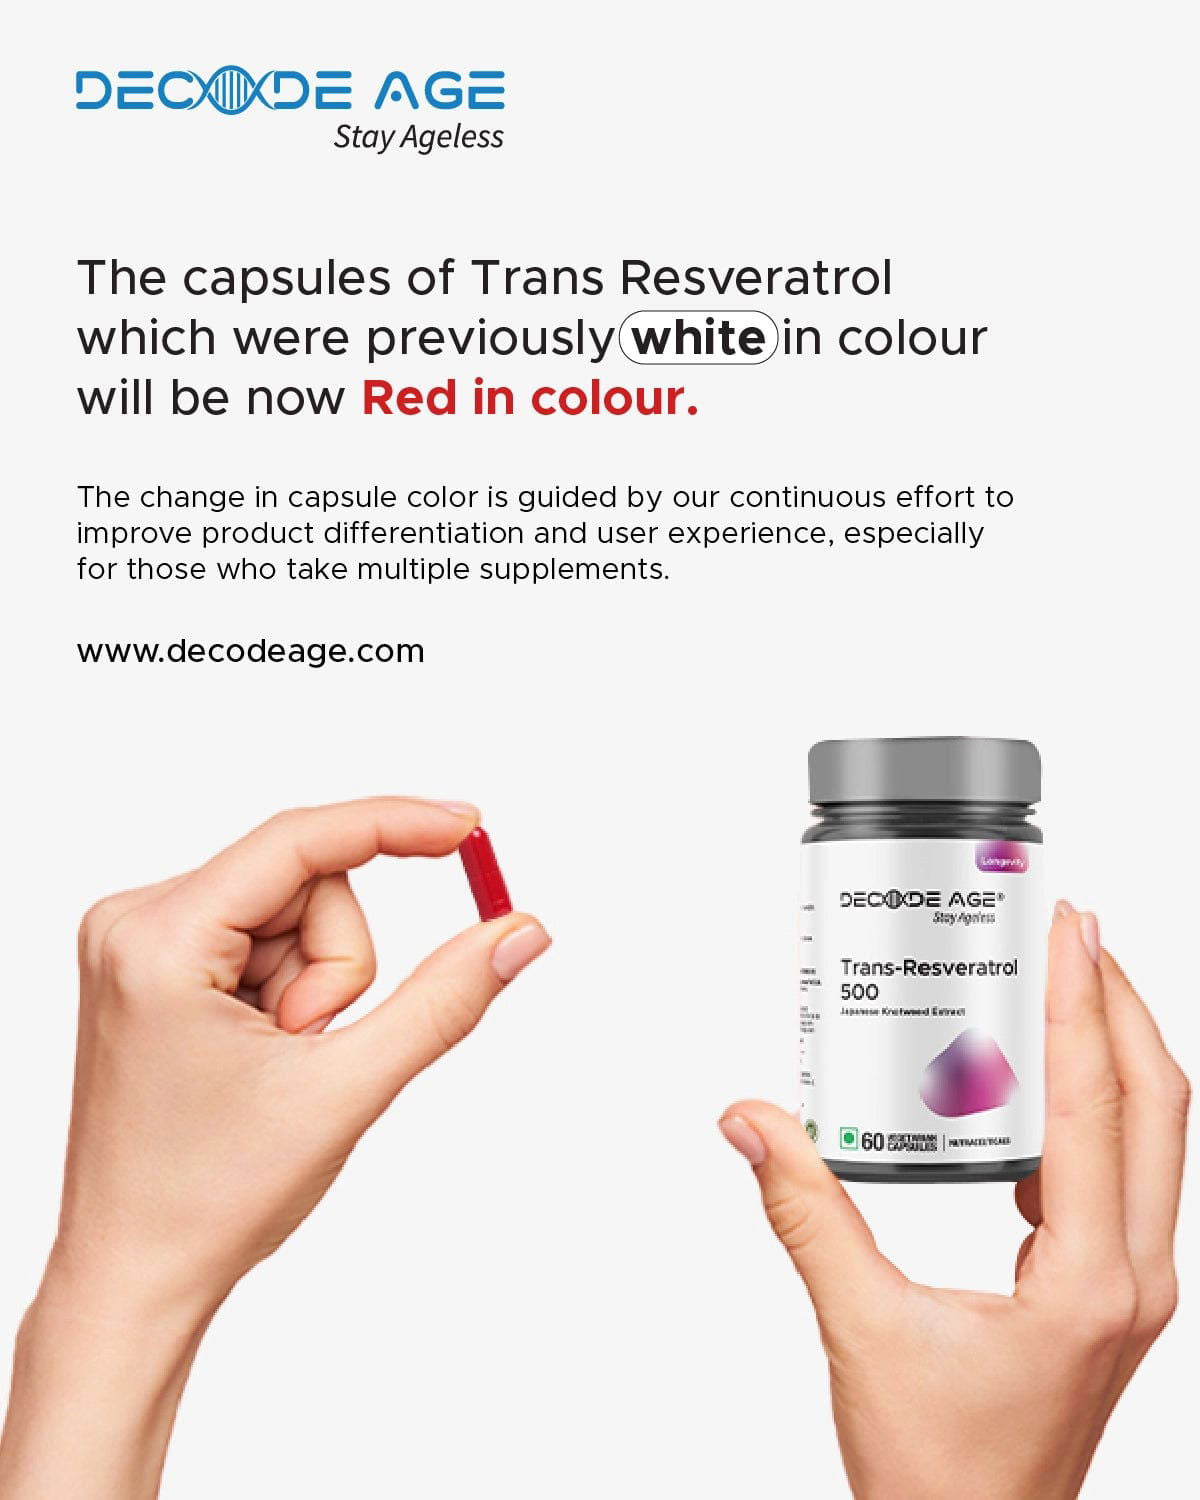 Trans Resveratrol 500mg | 99% Pure Japanese Knotweed Extract | 60 Capsule - Decode Age